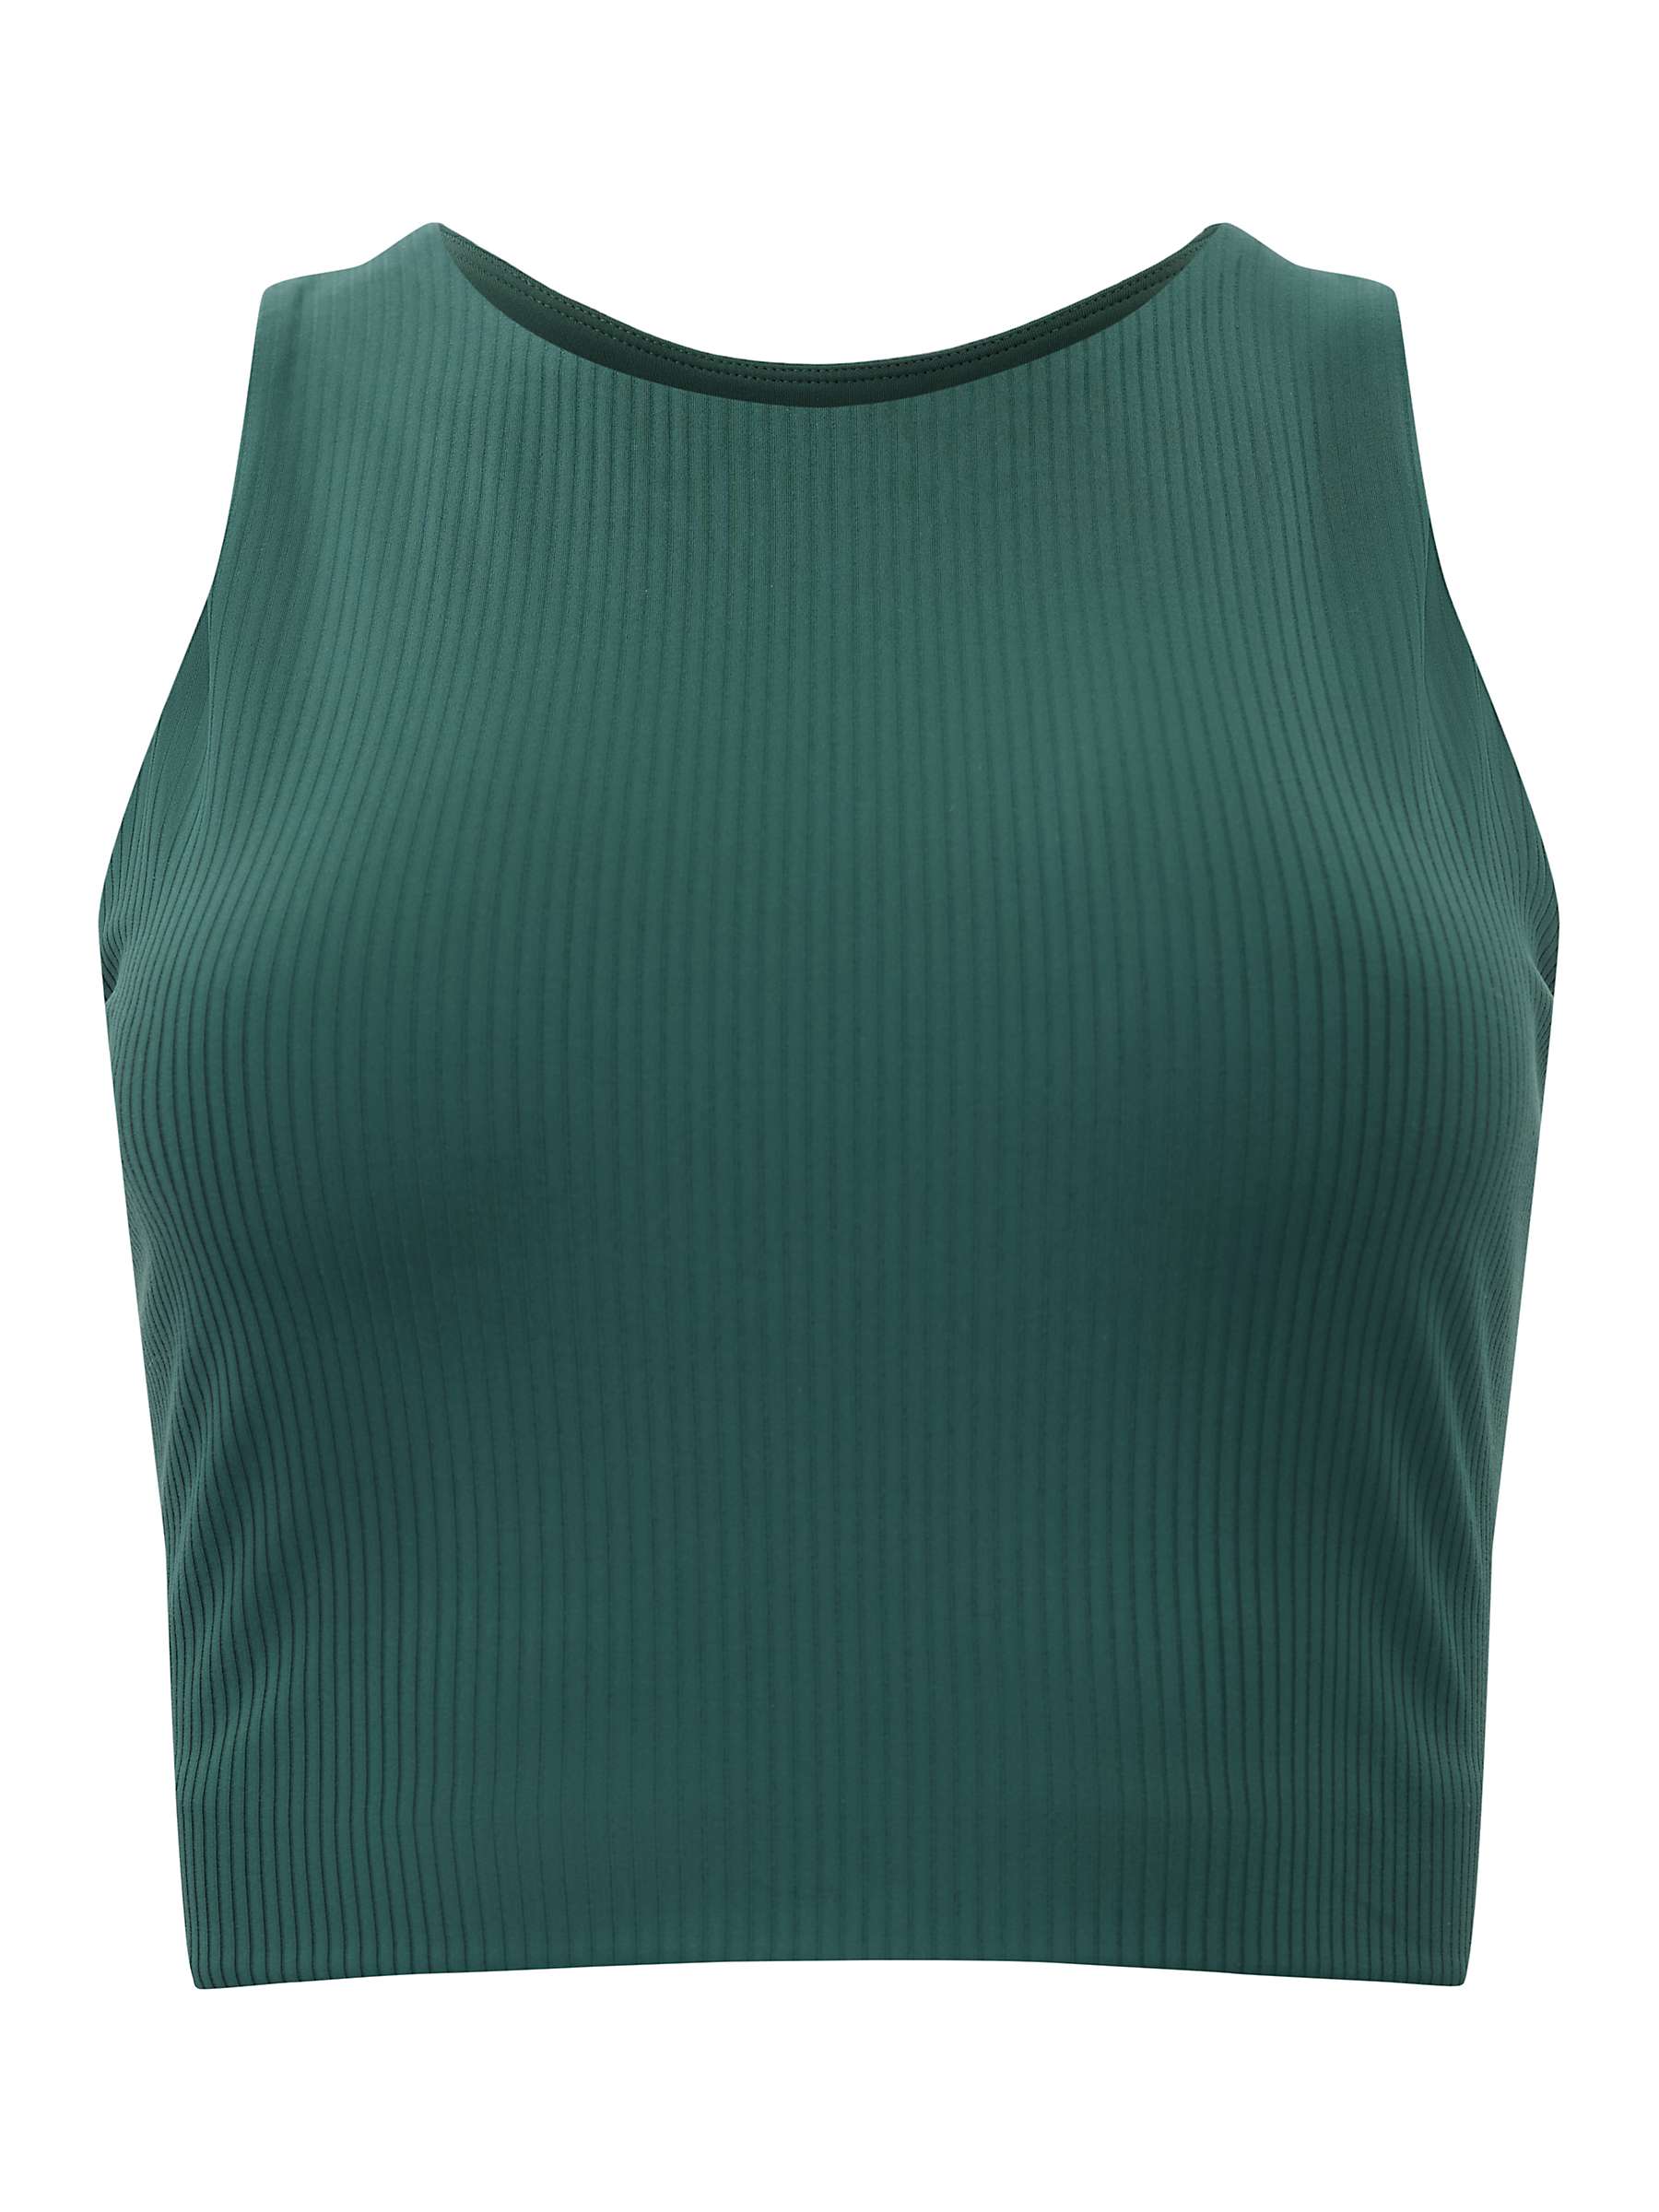 Buy Girlfriend Collective Dylan Ribbed Cropped Sports Bra Online at johnlewis.com